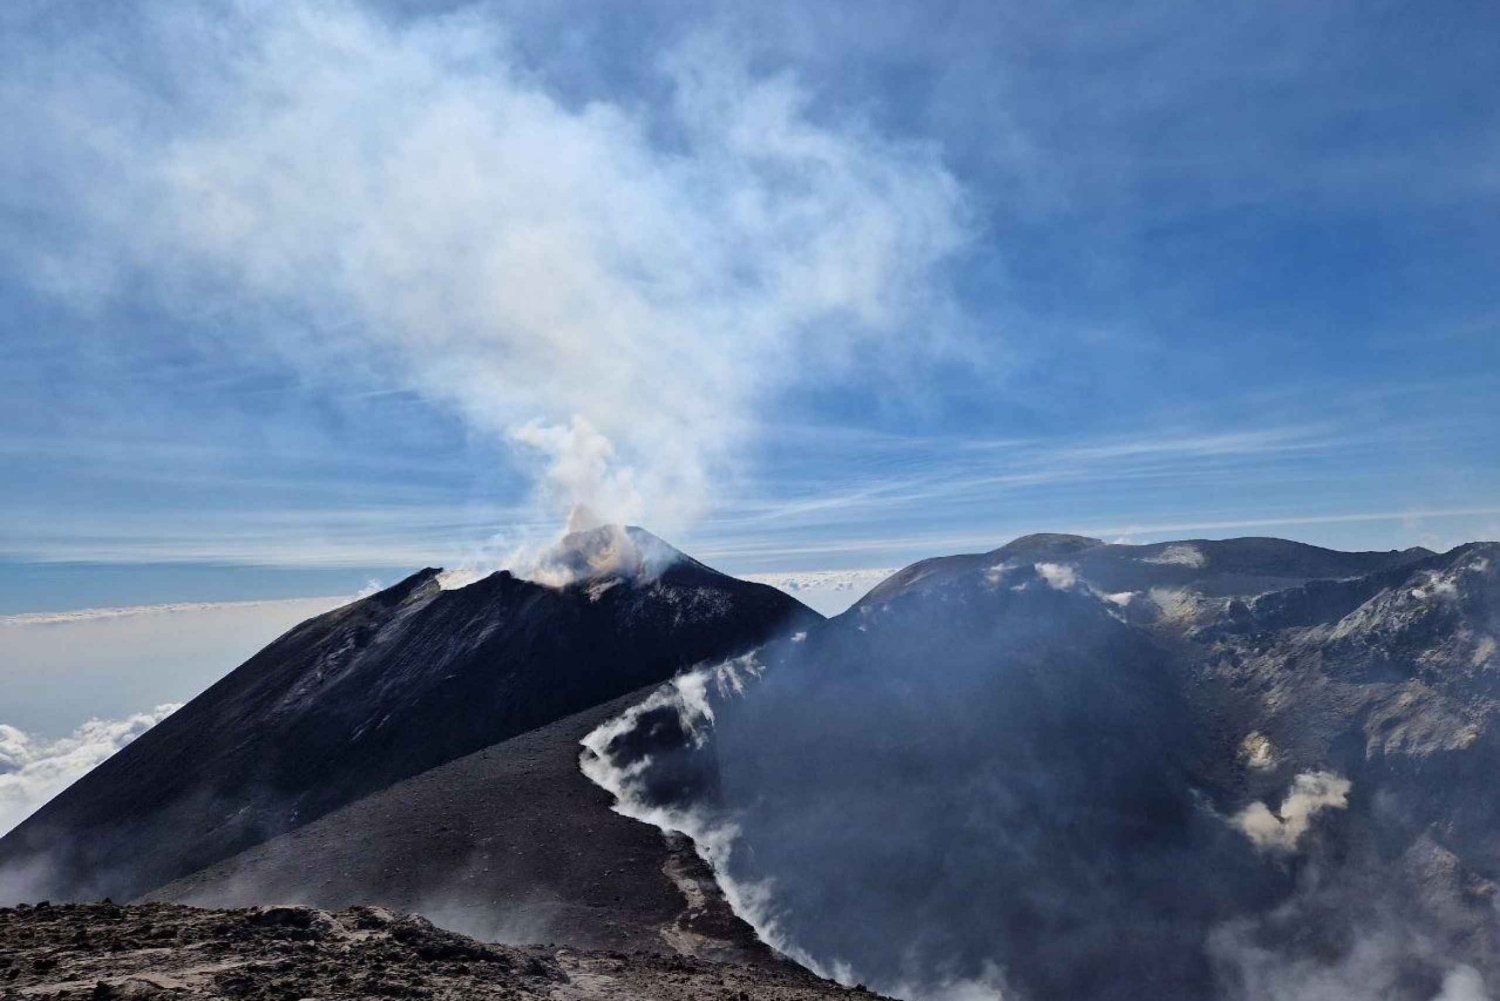 Etna North: Guided trekking to Summit volcano craters